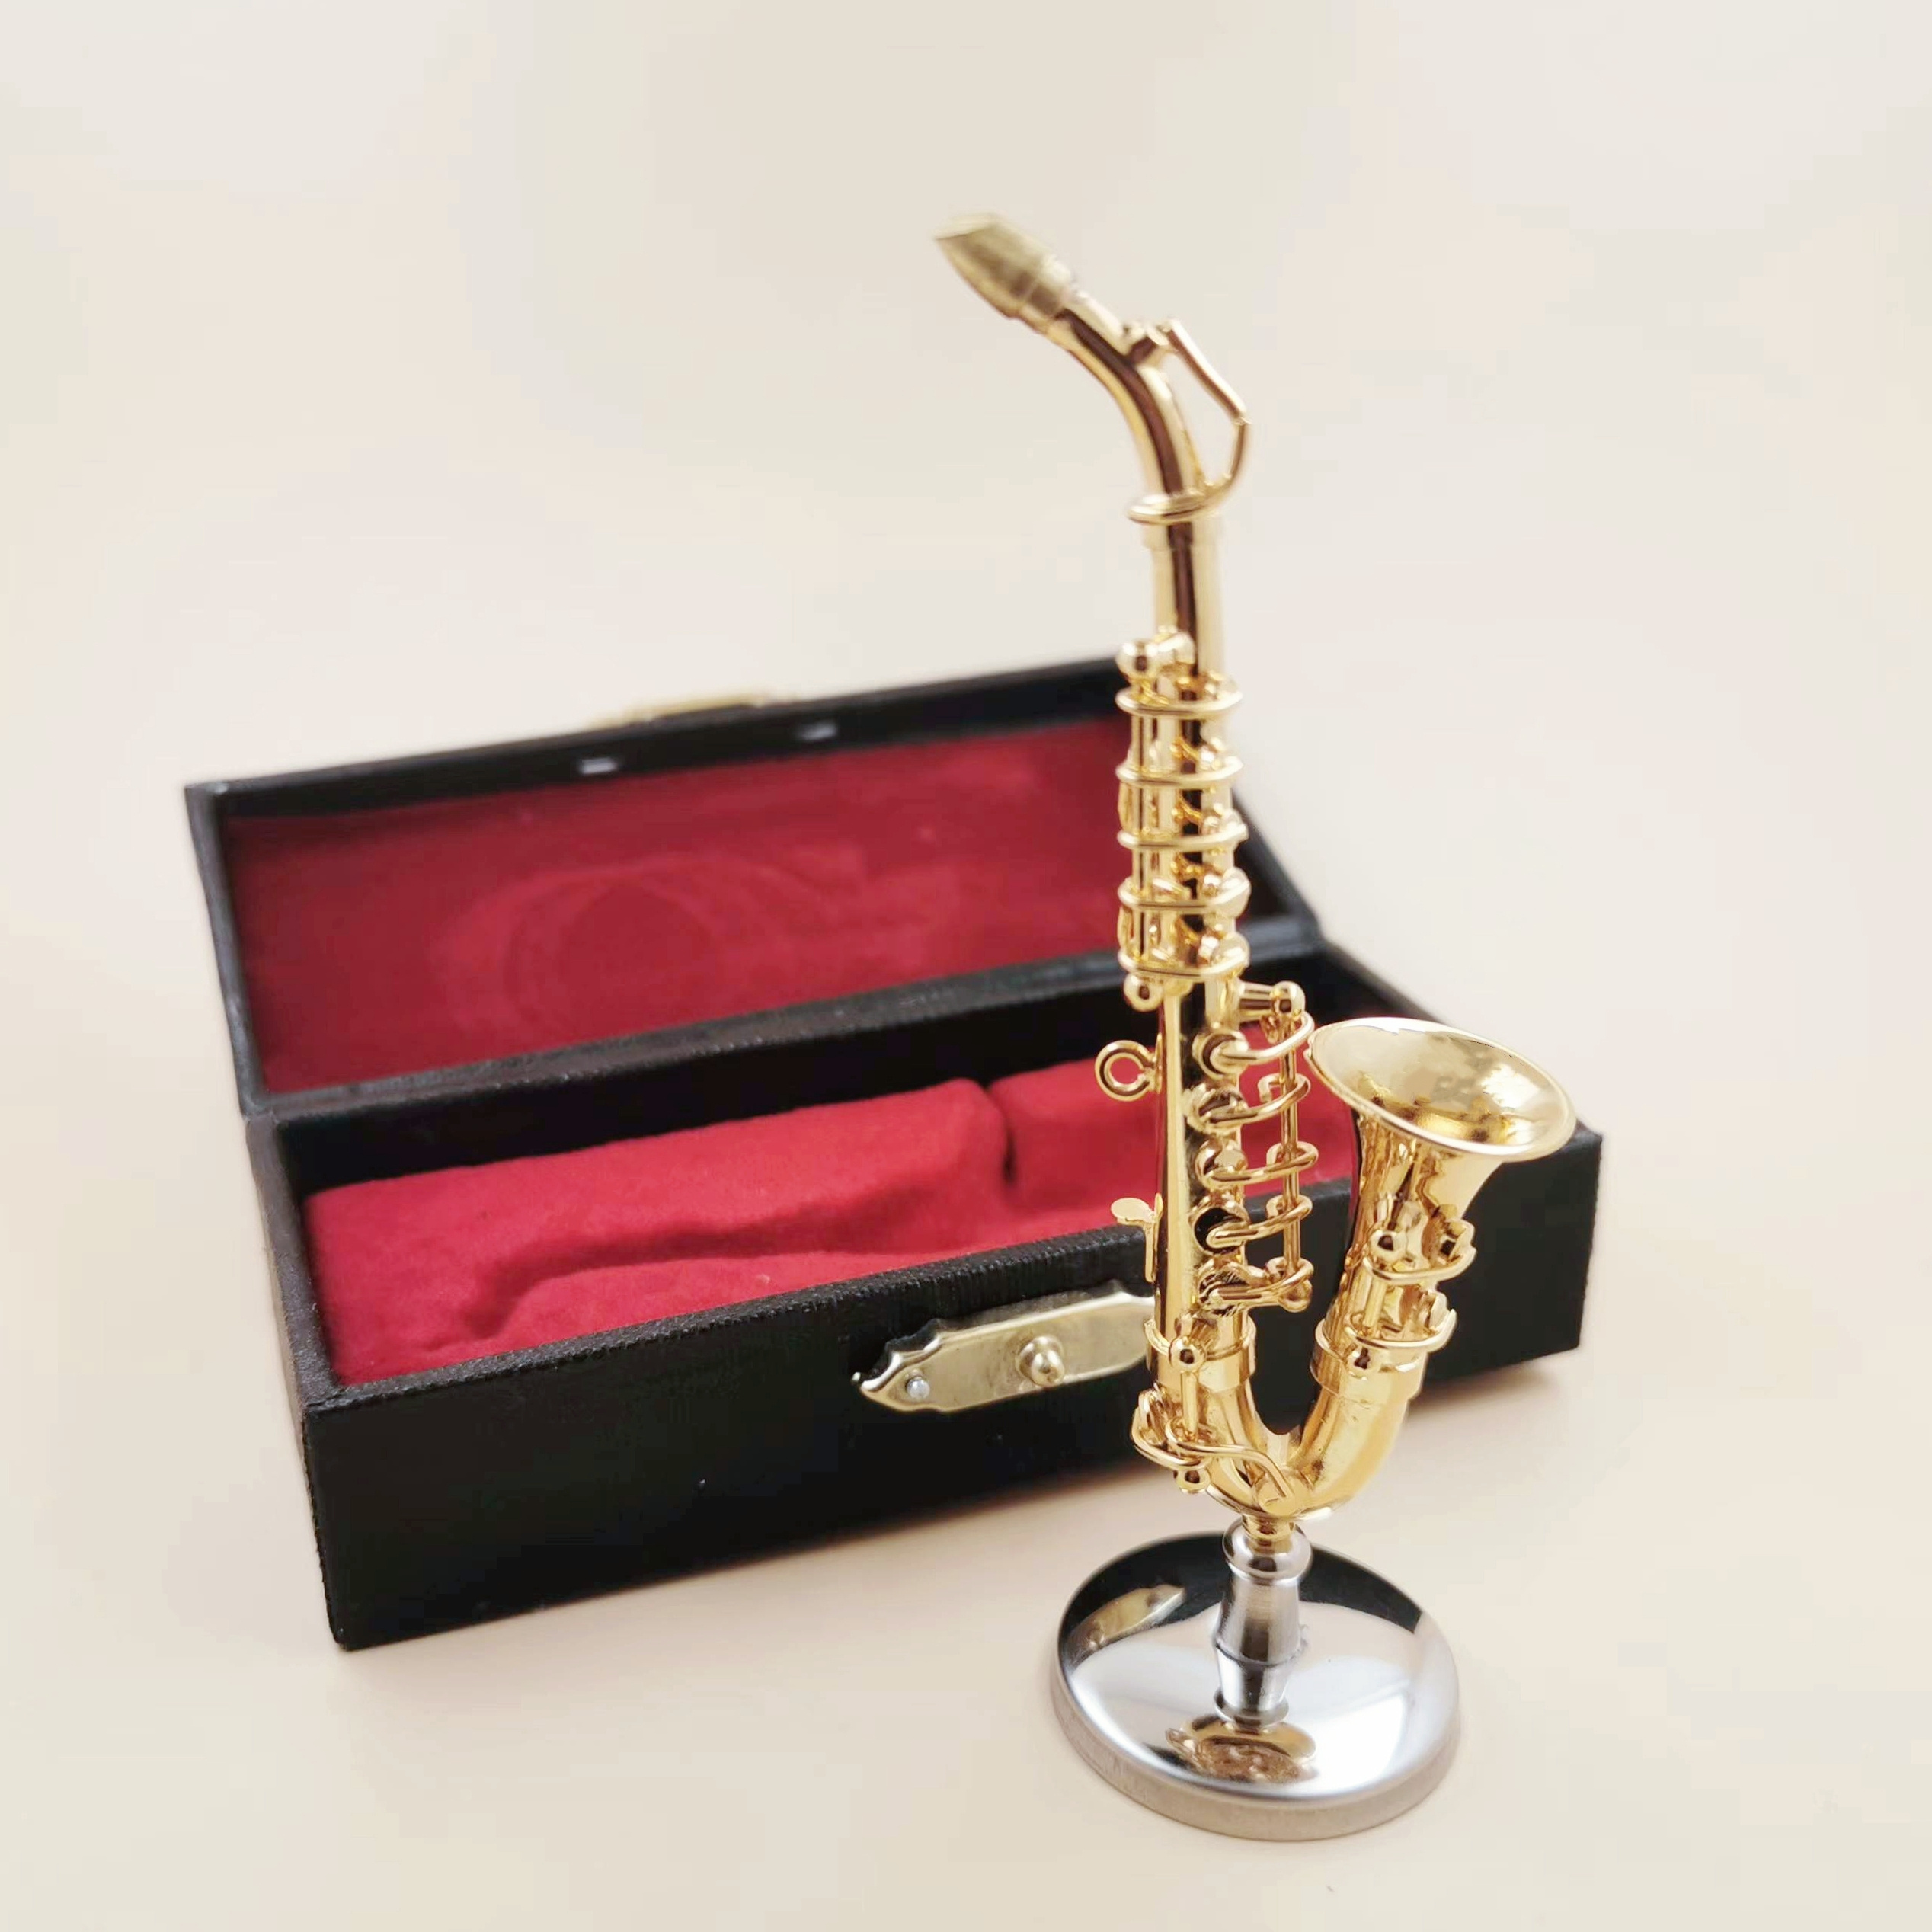  Dselvgvu Copper Miniature Saxophone with Stand and